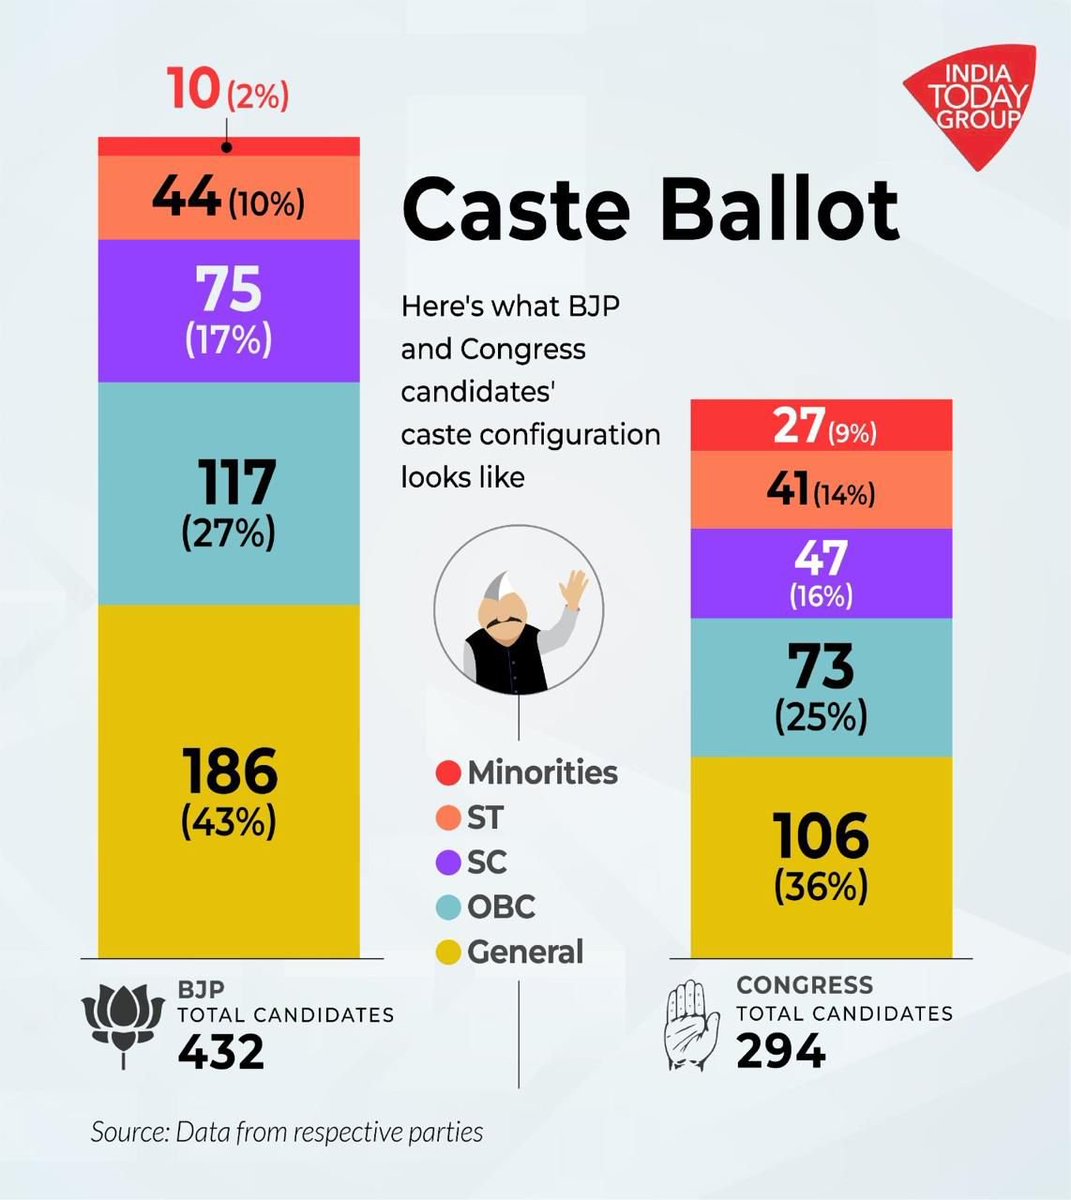 Unveiling the ticket distribution among various castes and communities within BJP and Congress.